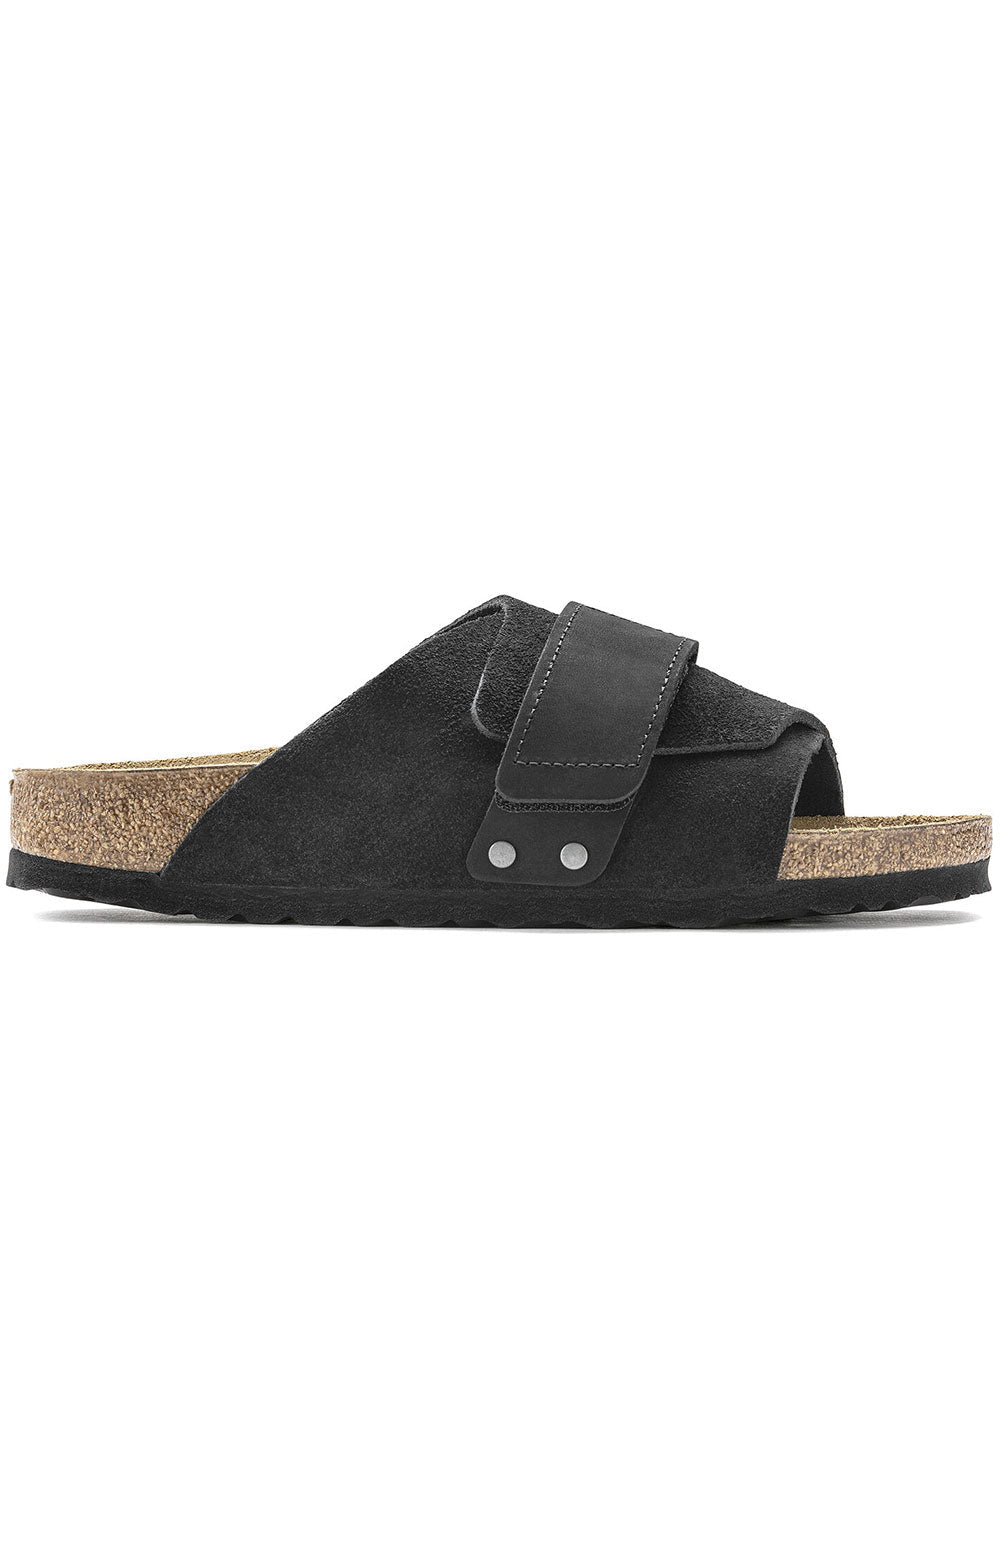 Comfortable and stylish black sandals with cushioned insole and non-slip sole